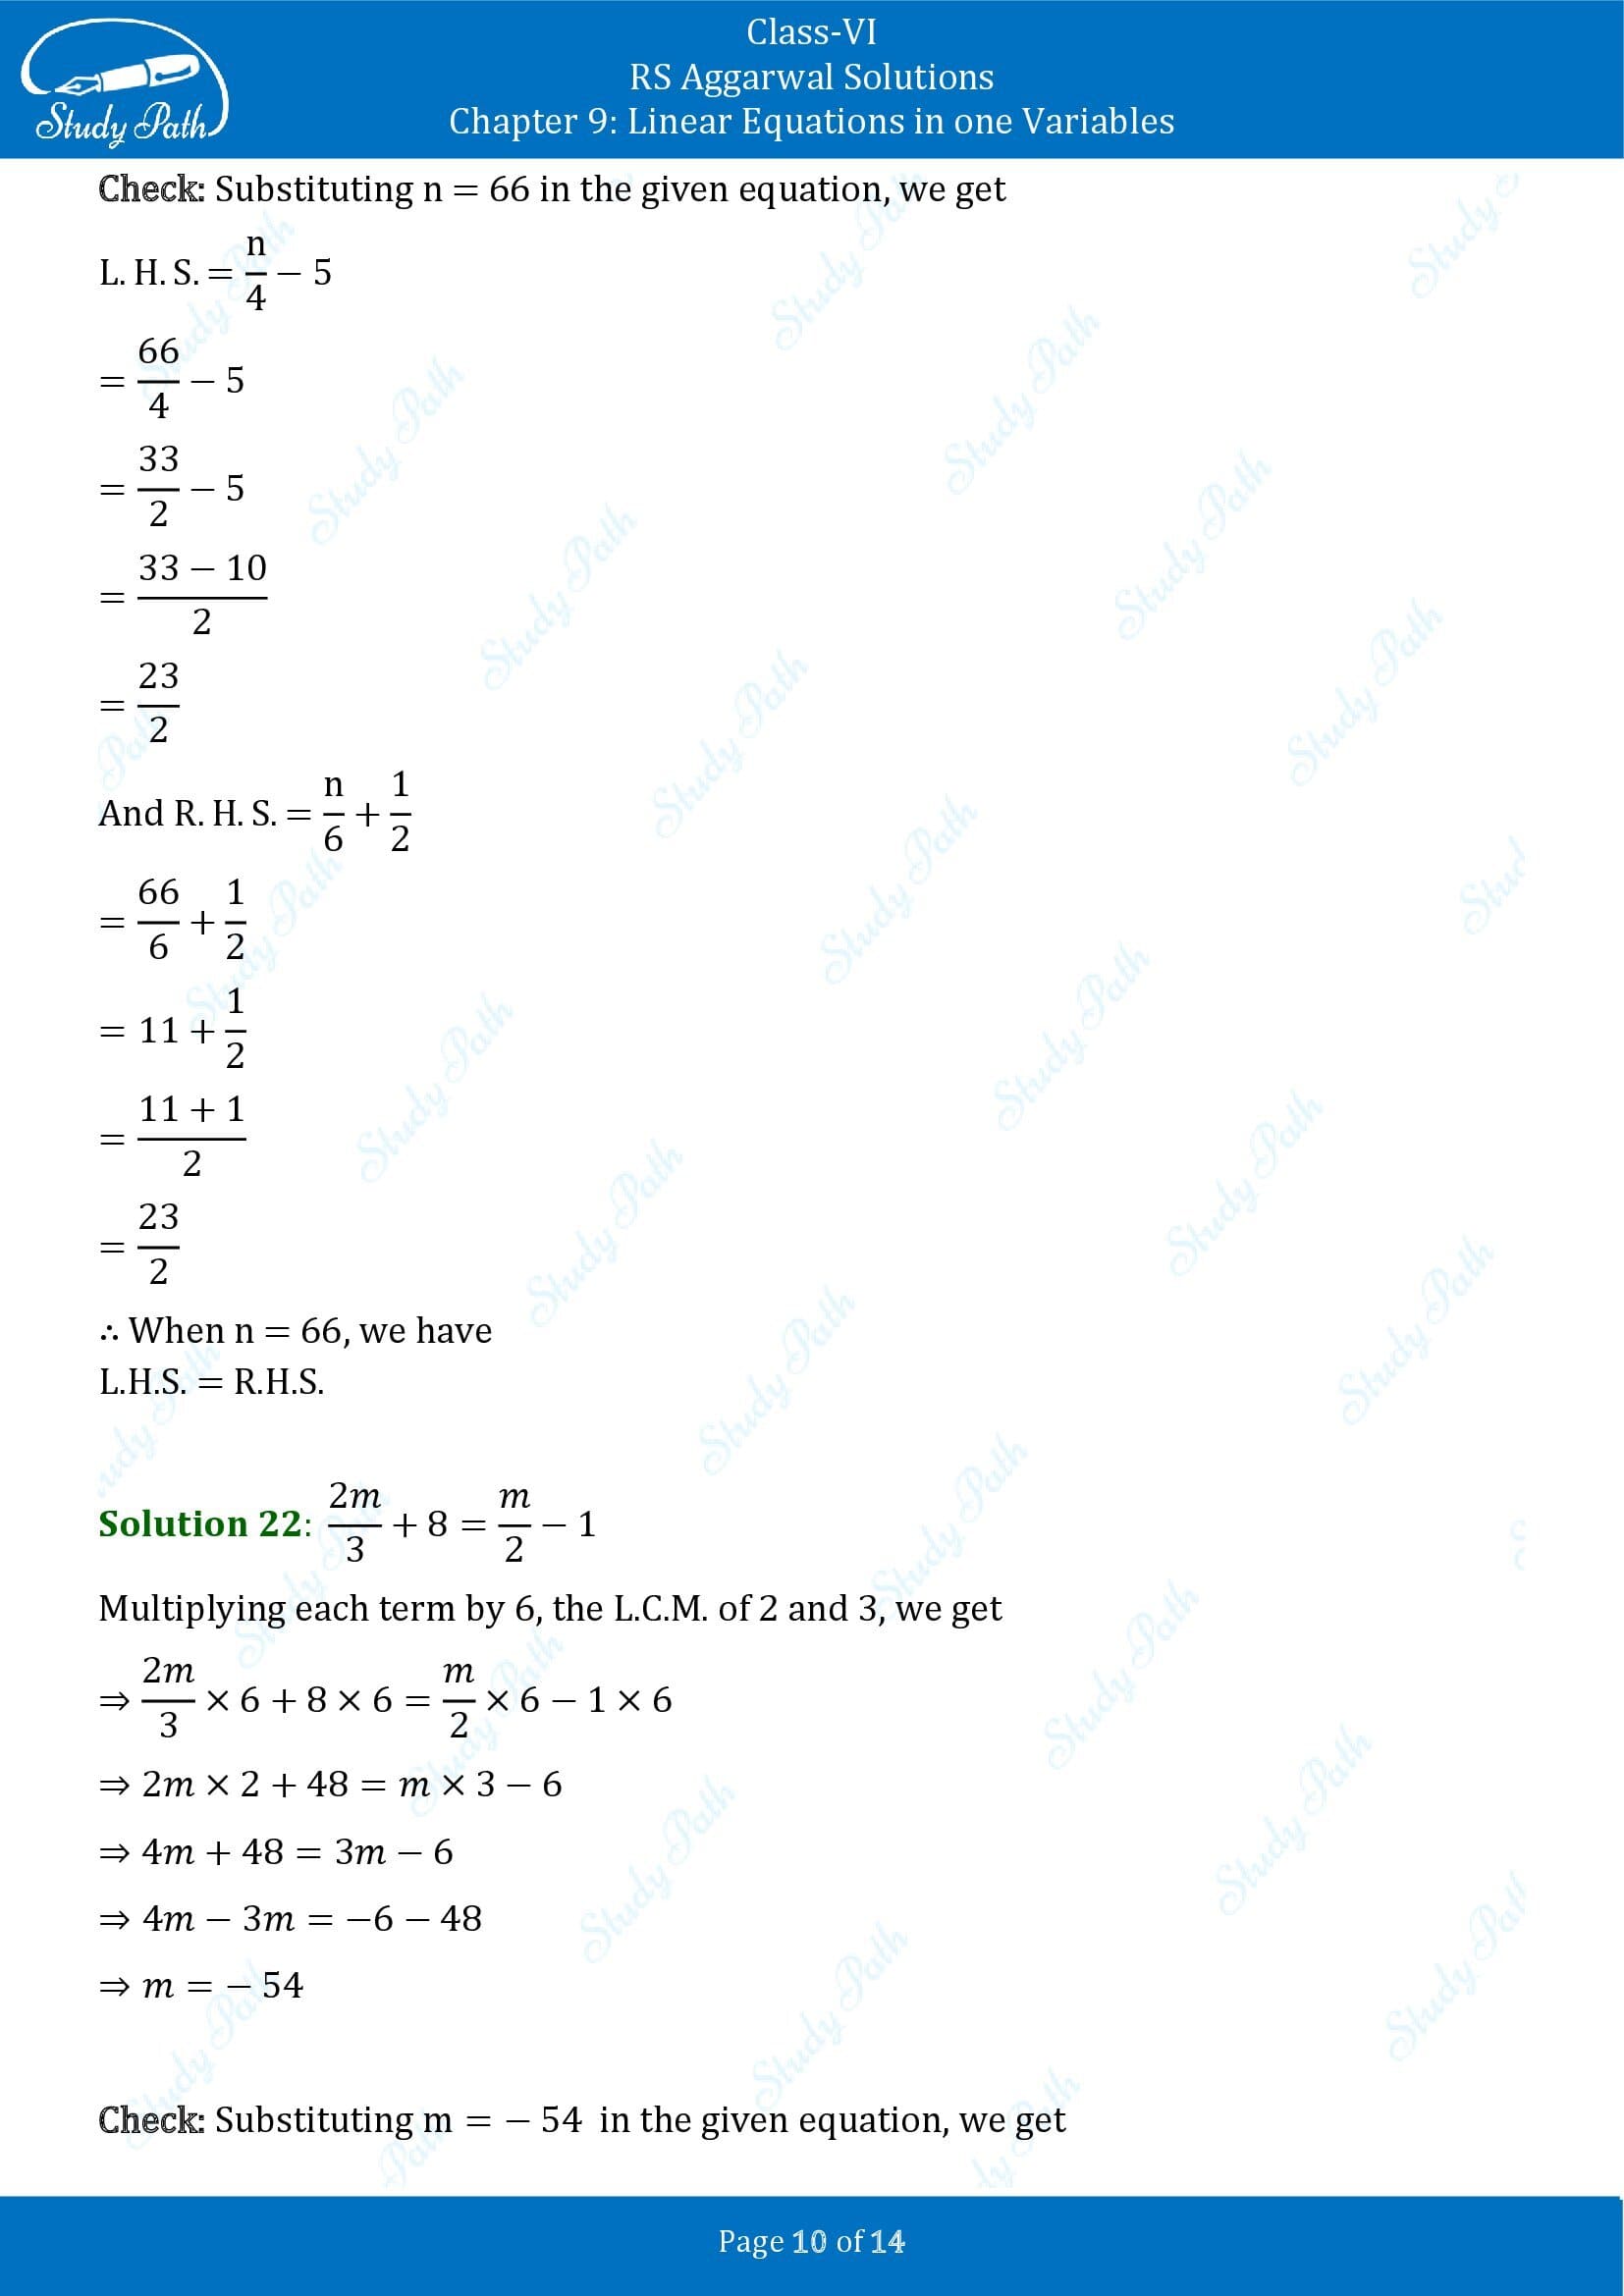 RS Aggarwal Solutions Class 6 Chapter 9 Linear Equations in One Variable Exercise 9B 00010